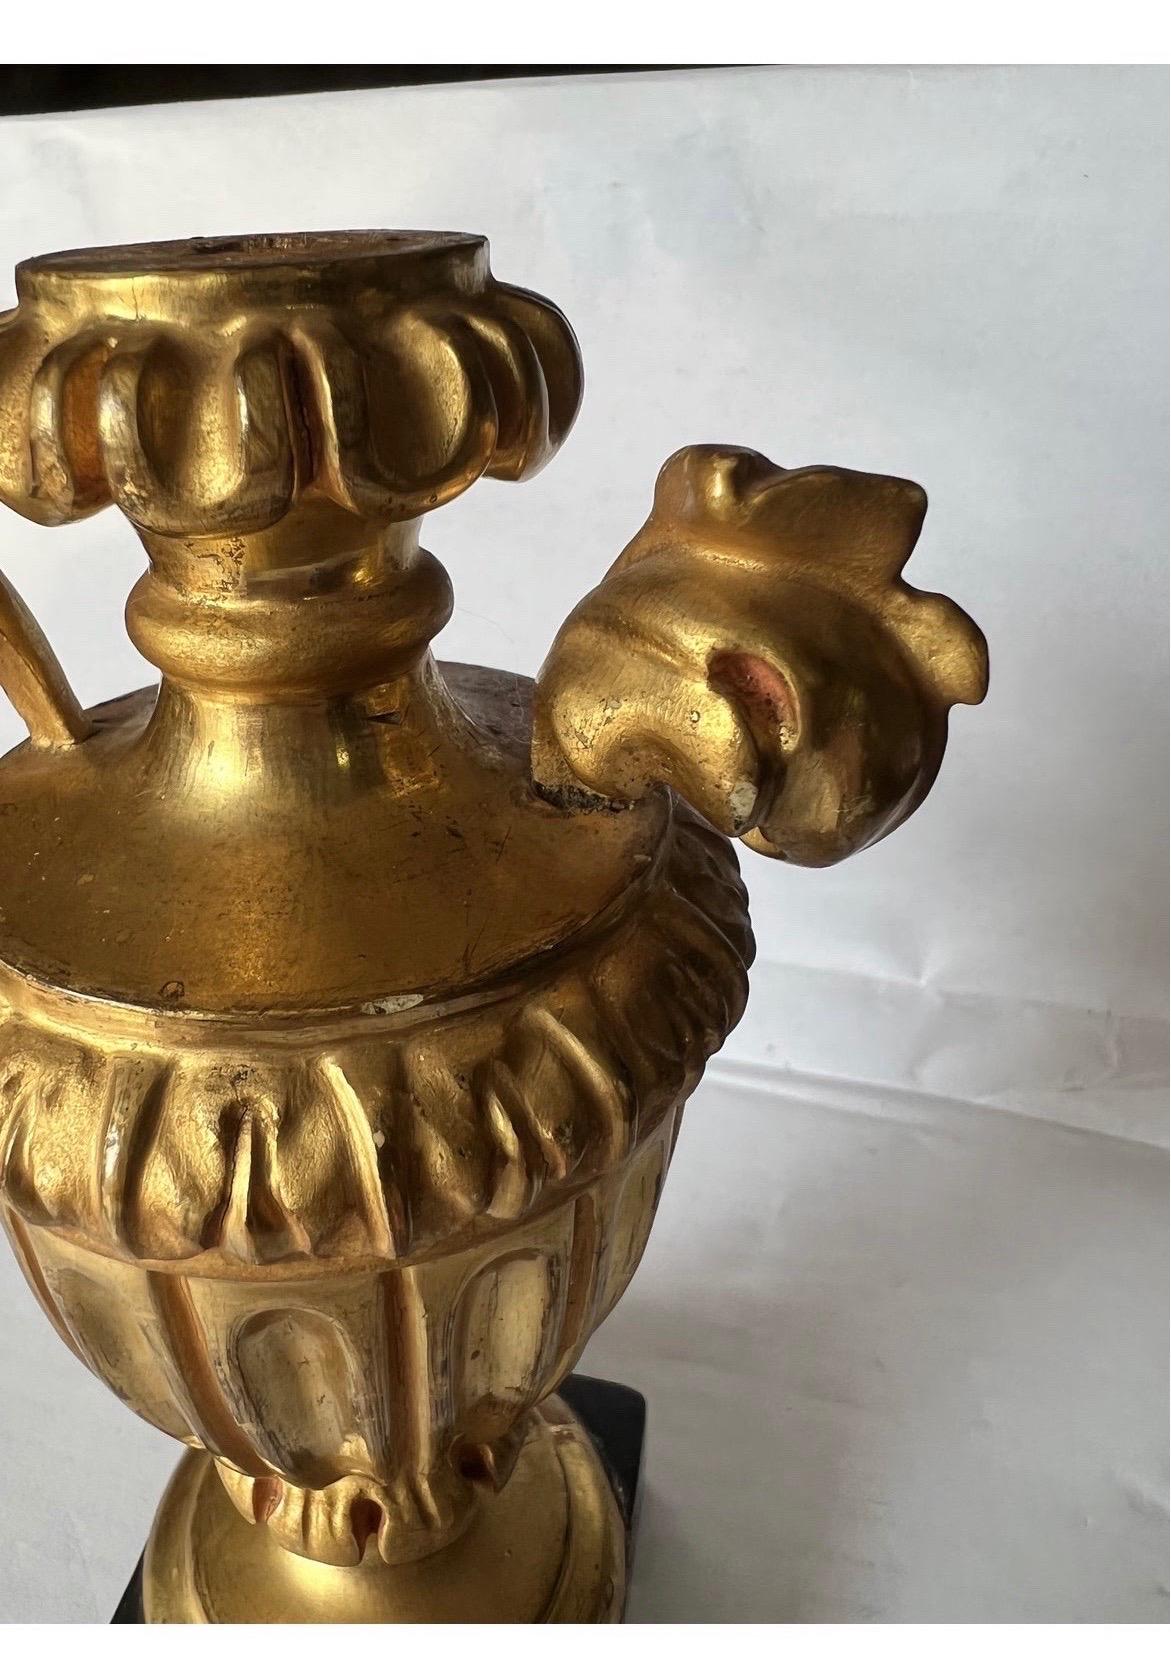 Pair Italian Neoclassical Carved Gilt Wood Ornamental Urns on Faux Marble Bases For Sale 2